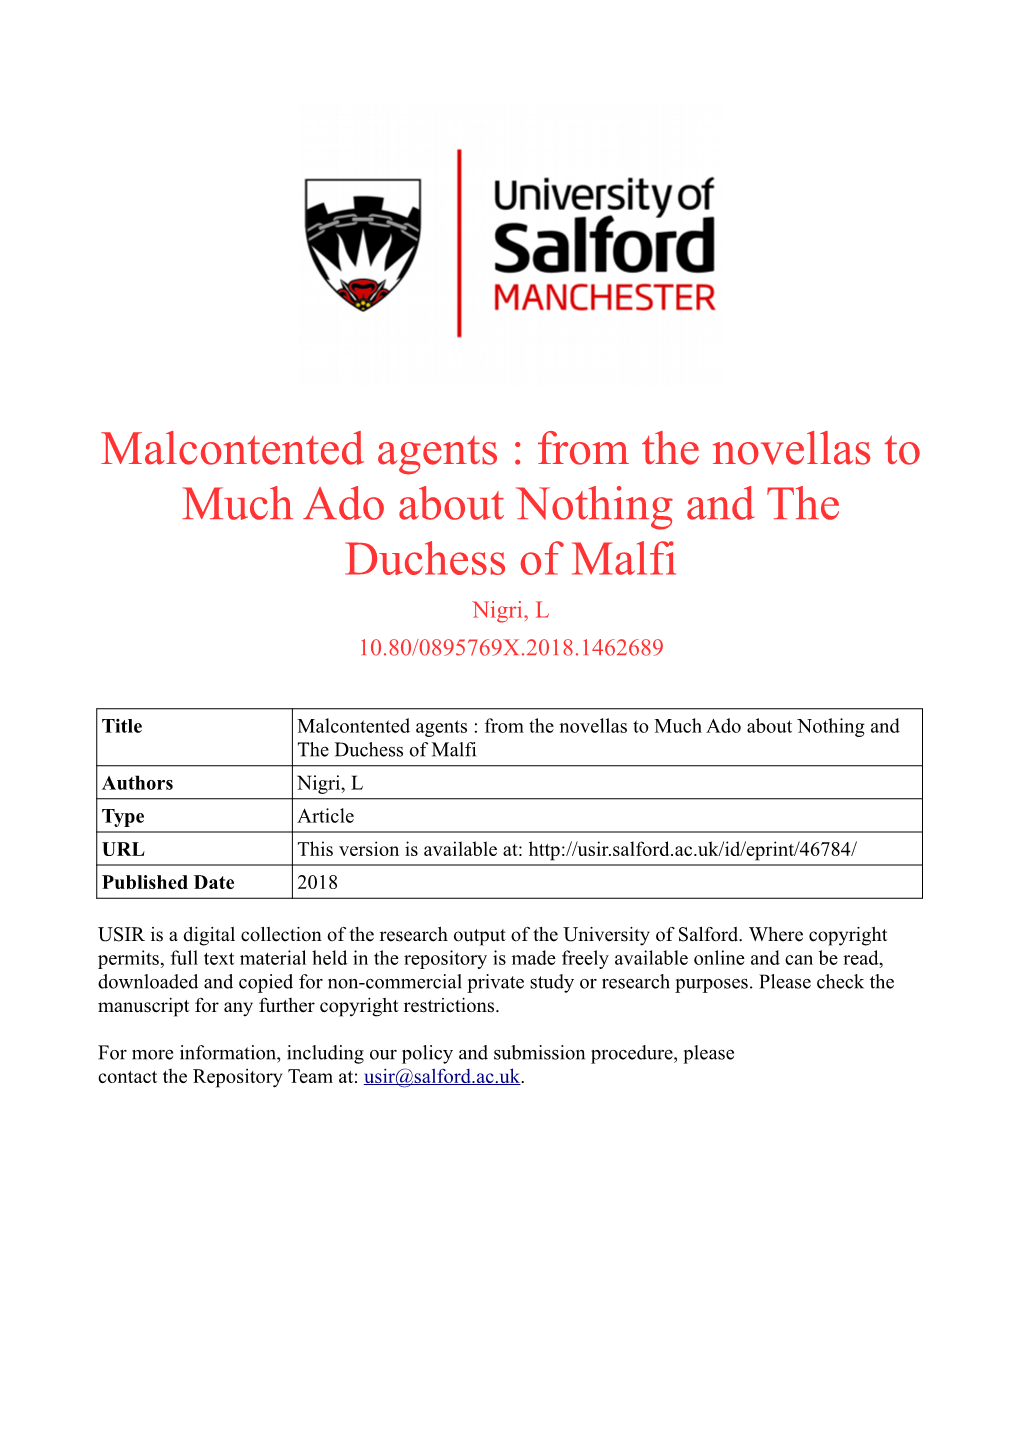 Malcontented Agents : from the Novellas to Much Ado About Nothing and the Duchess of Malfi Nigri, L 10.80/0895769X.2018.1462689